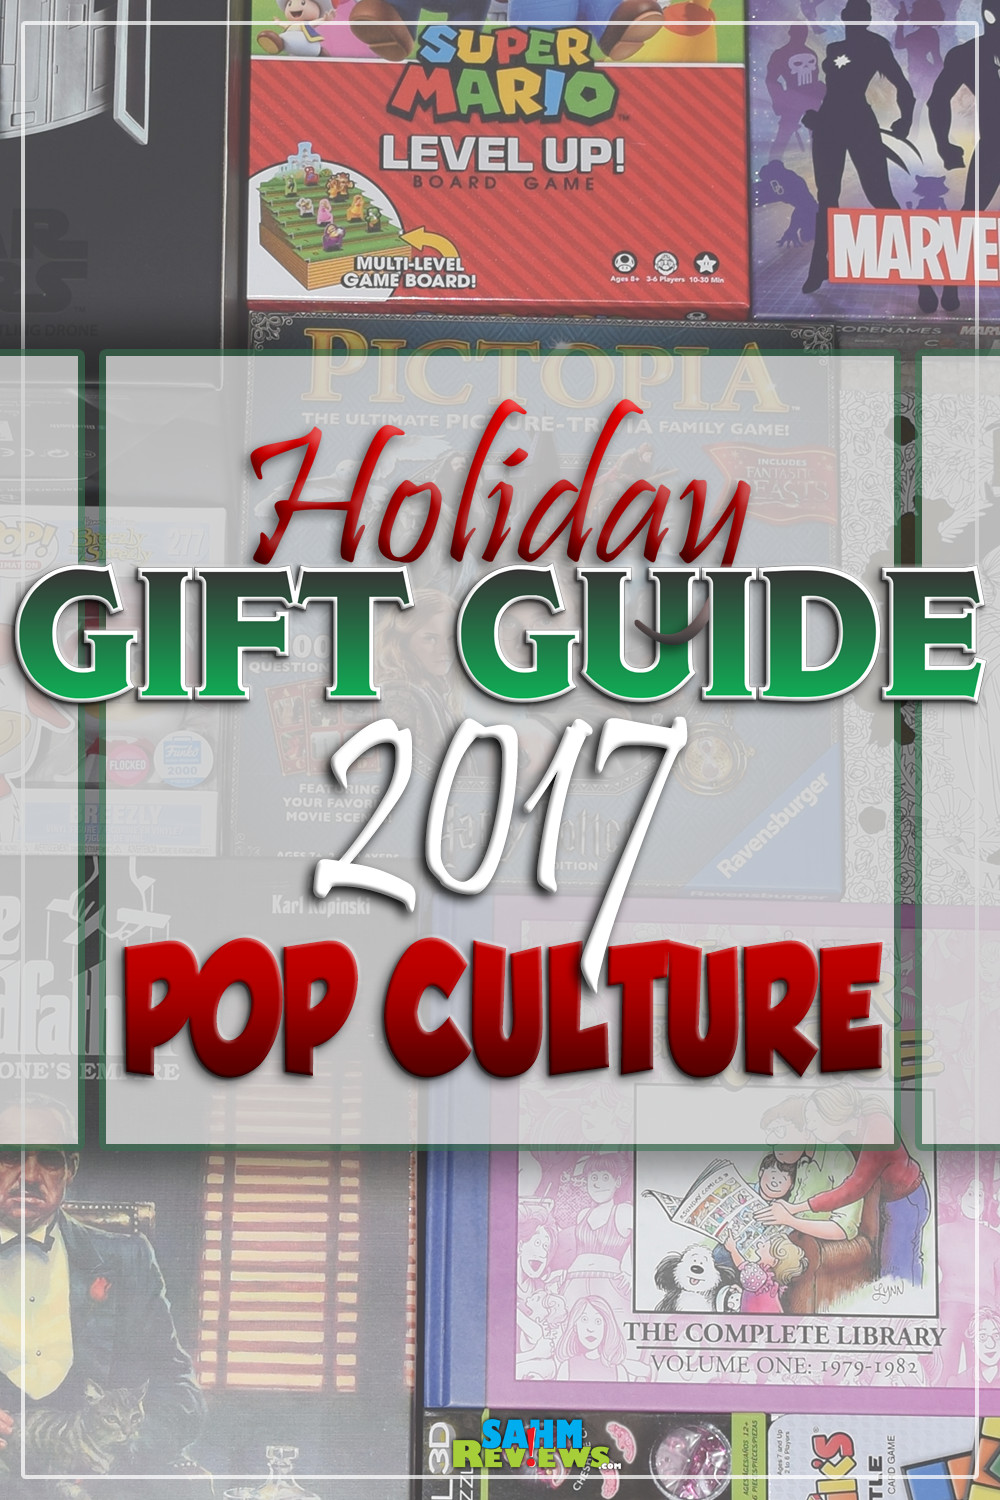 When you have a tough time deciding on a gift, you can't go wrong with pop culture. Check out this baker's dozen of ideas in our holiday gift guide! - SahmReviews.com